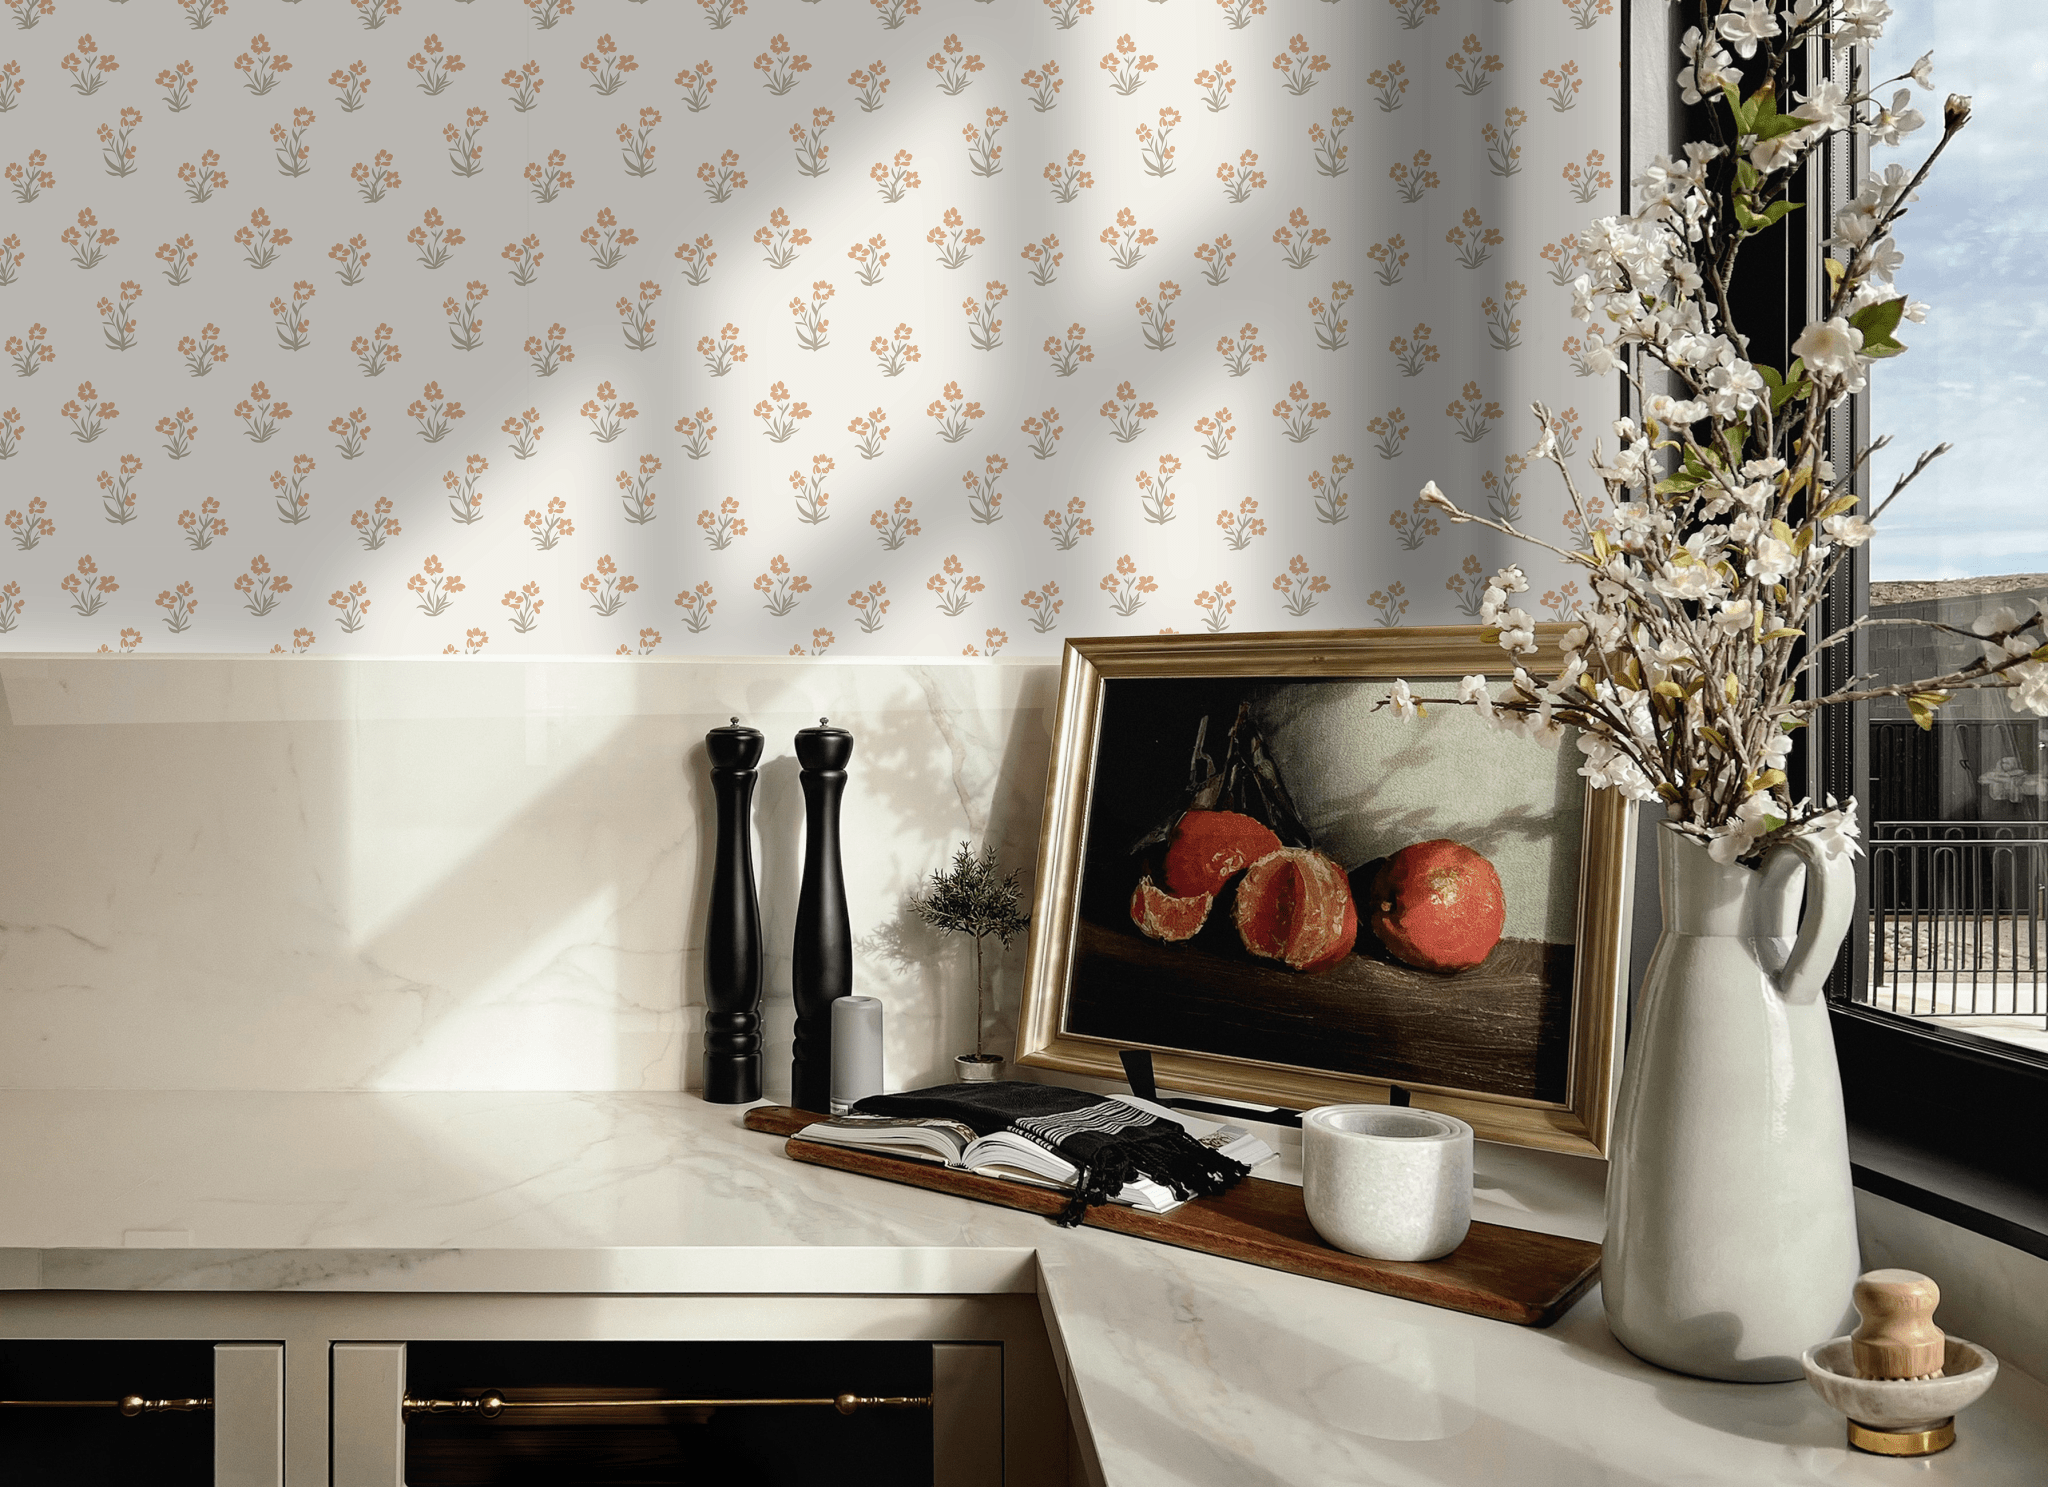 Kitchen adorned with sage sprig wallpaper, offering a subtle, herbal-inspired backdrop for modern culinary spaces.